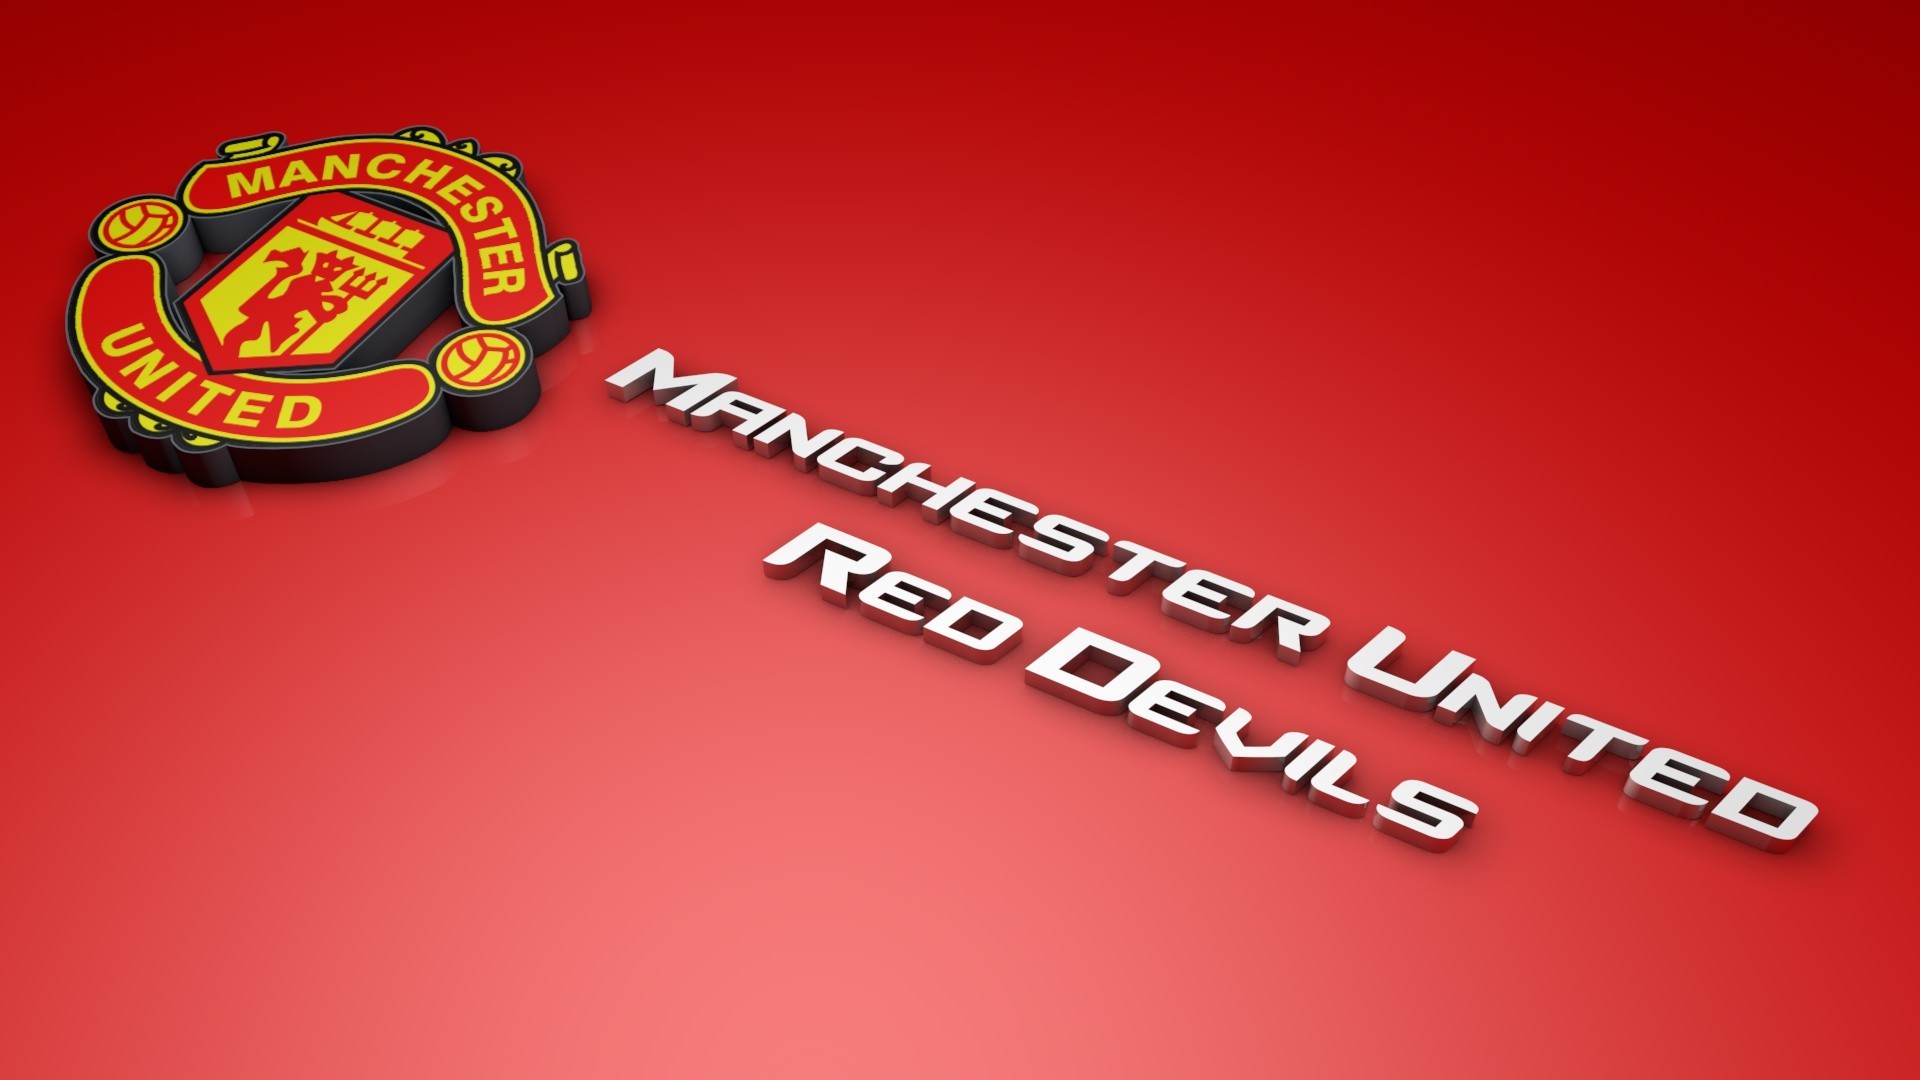 Manchester United Logo Red Background 1920x1080